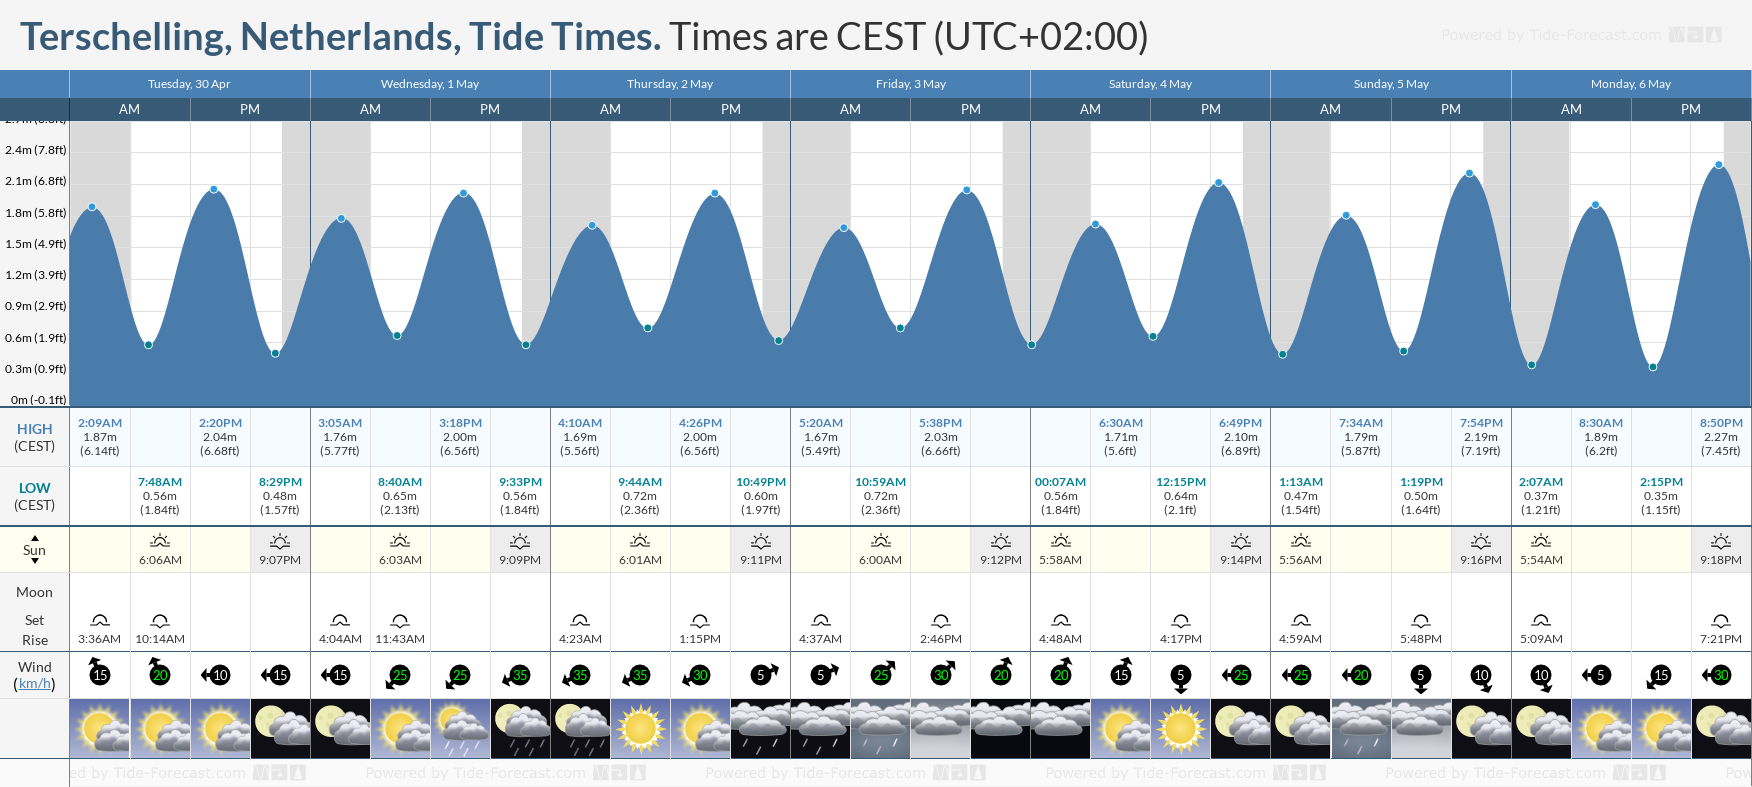 Terschelling, Netherlands Tide Chart including high and low tide times for the next 7 days